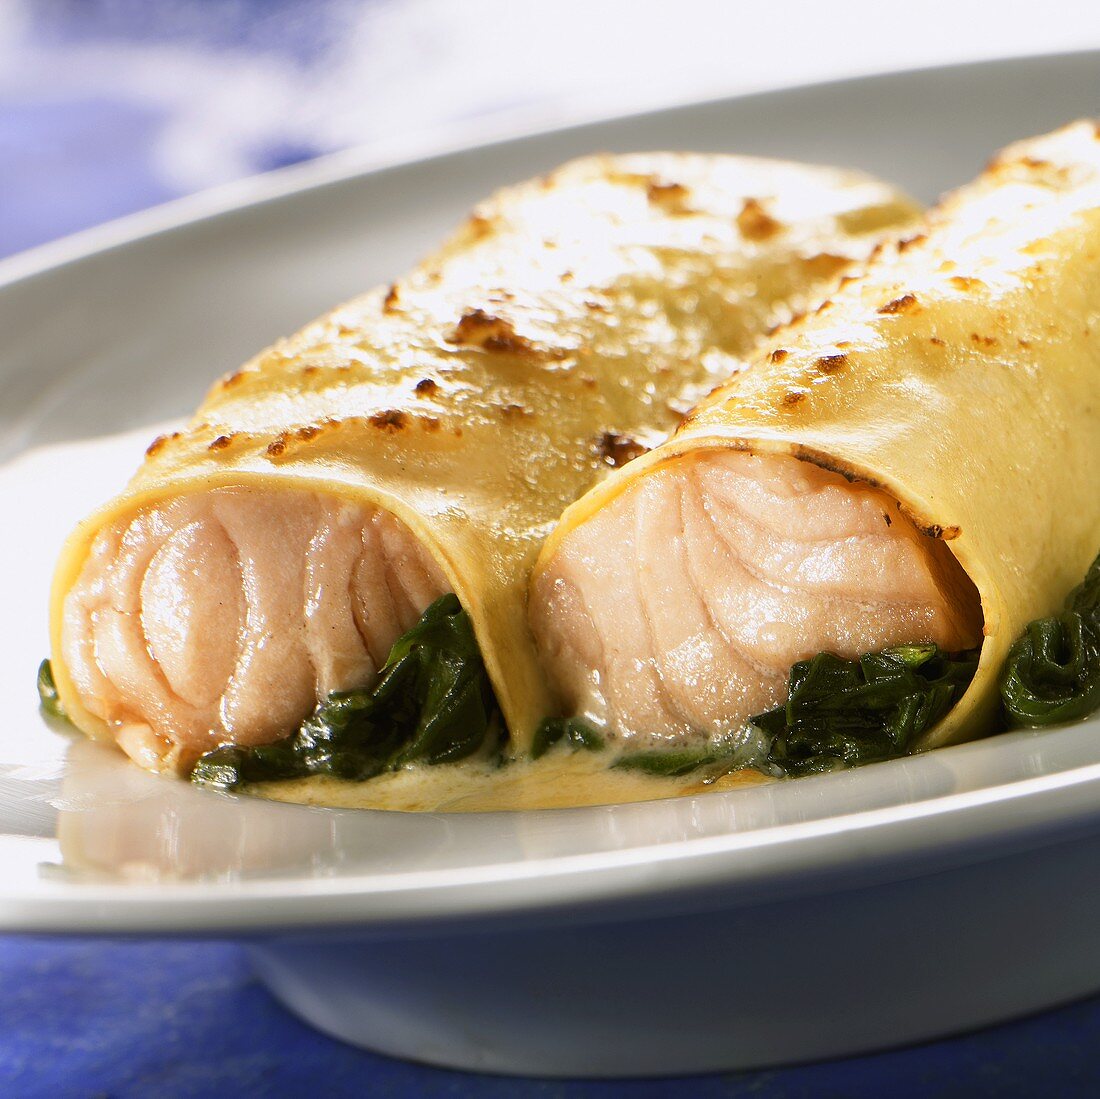 Cannelloni filled with salmon and spinach